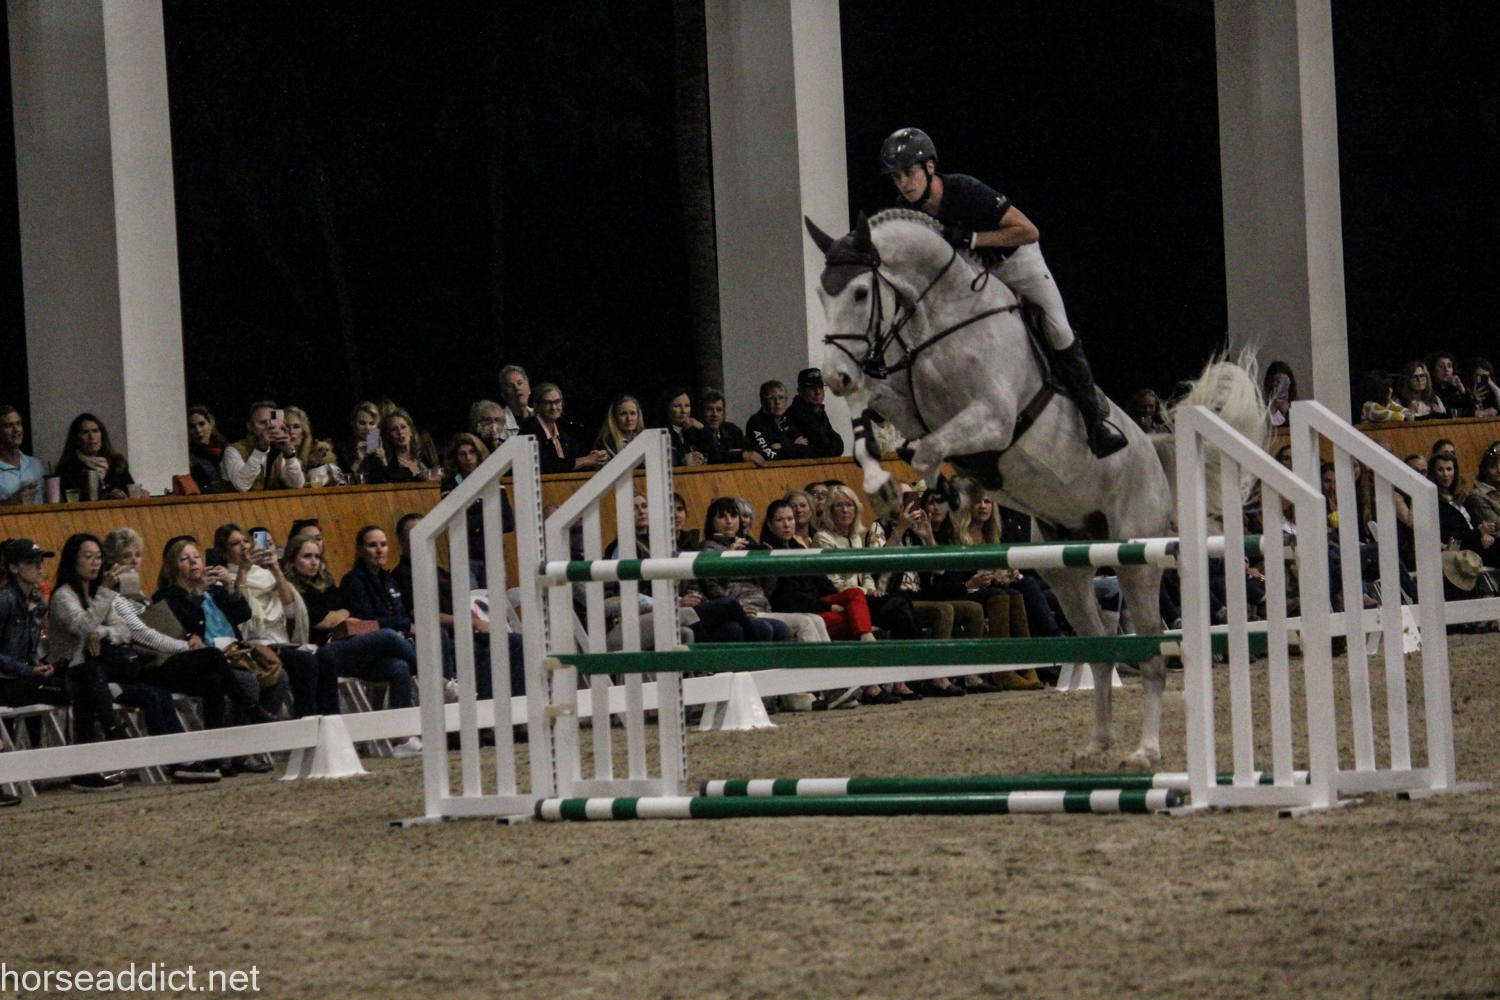 Dressage Horses and Jumpers all in one evening!